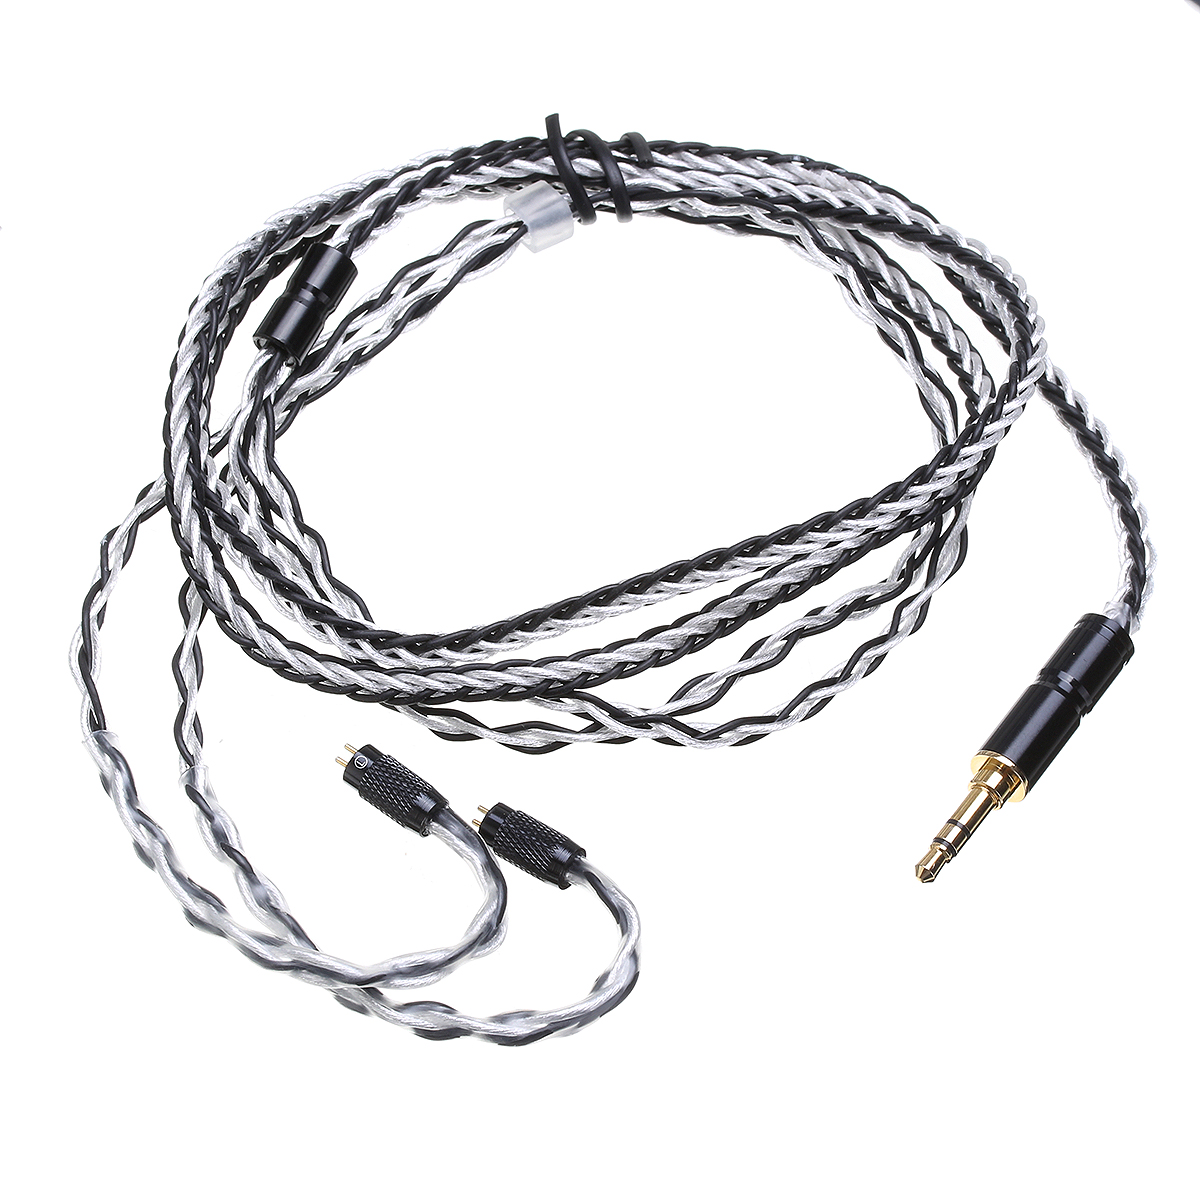 

BGVP 6N 3.5mm 600 Wire OCC Pure Silver MMCX Plating Earphone Cable 8 Core Balancing Audiophile Mixed Braided Cable